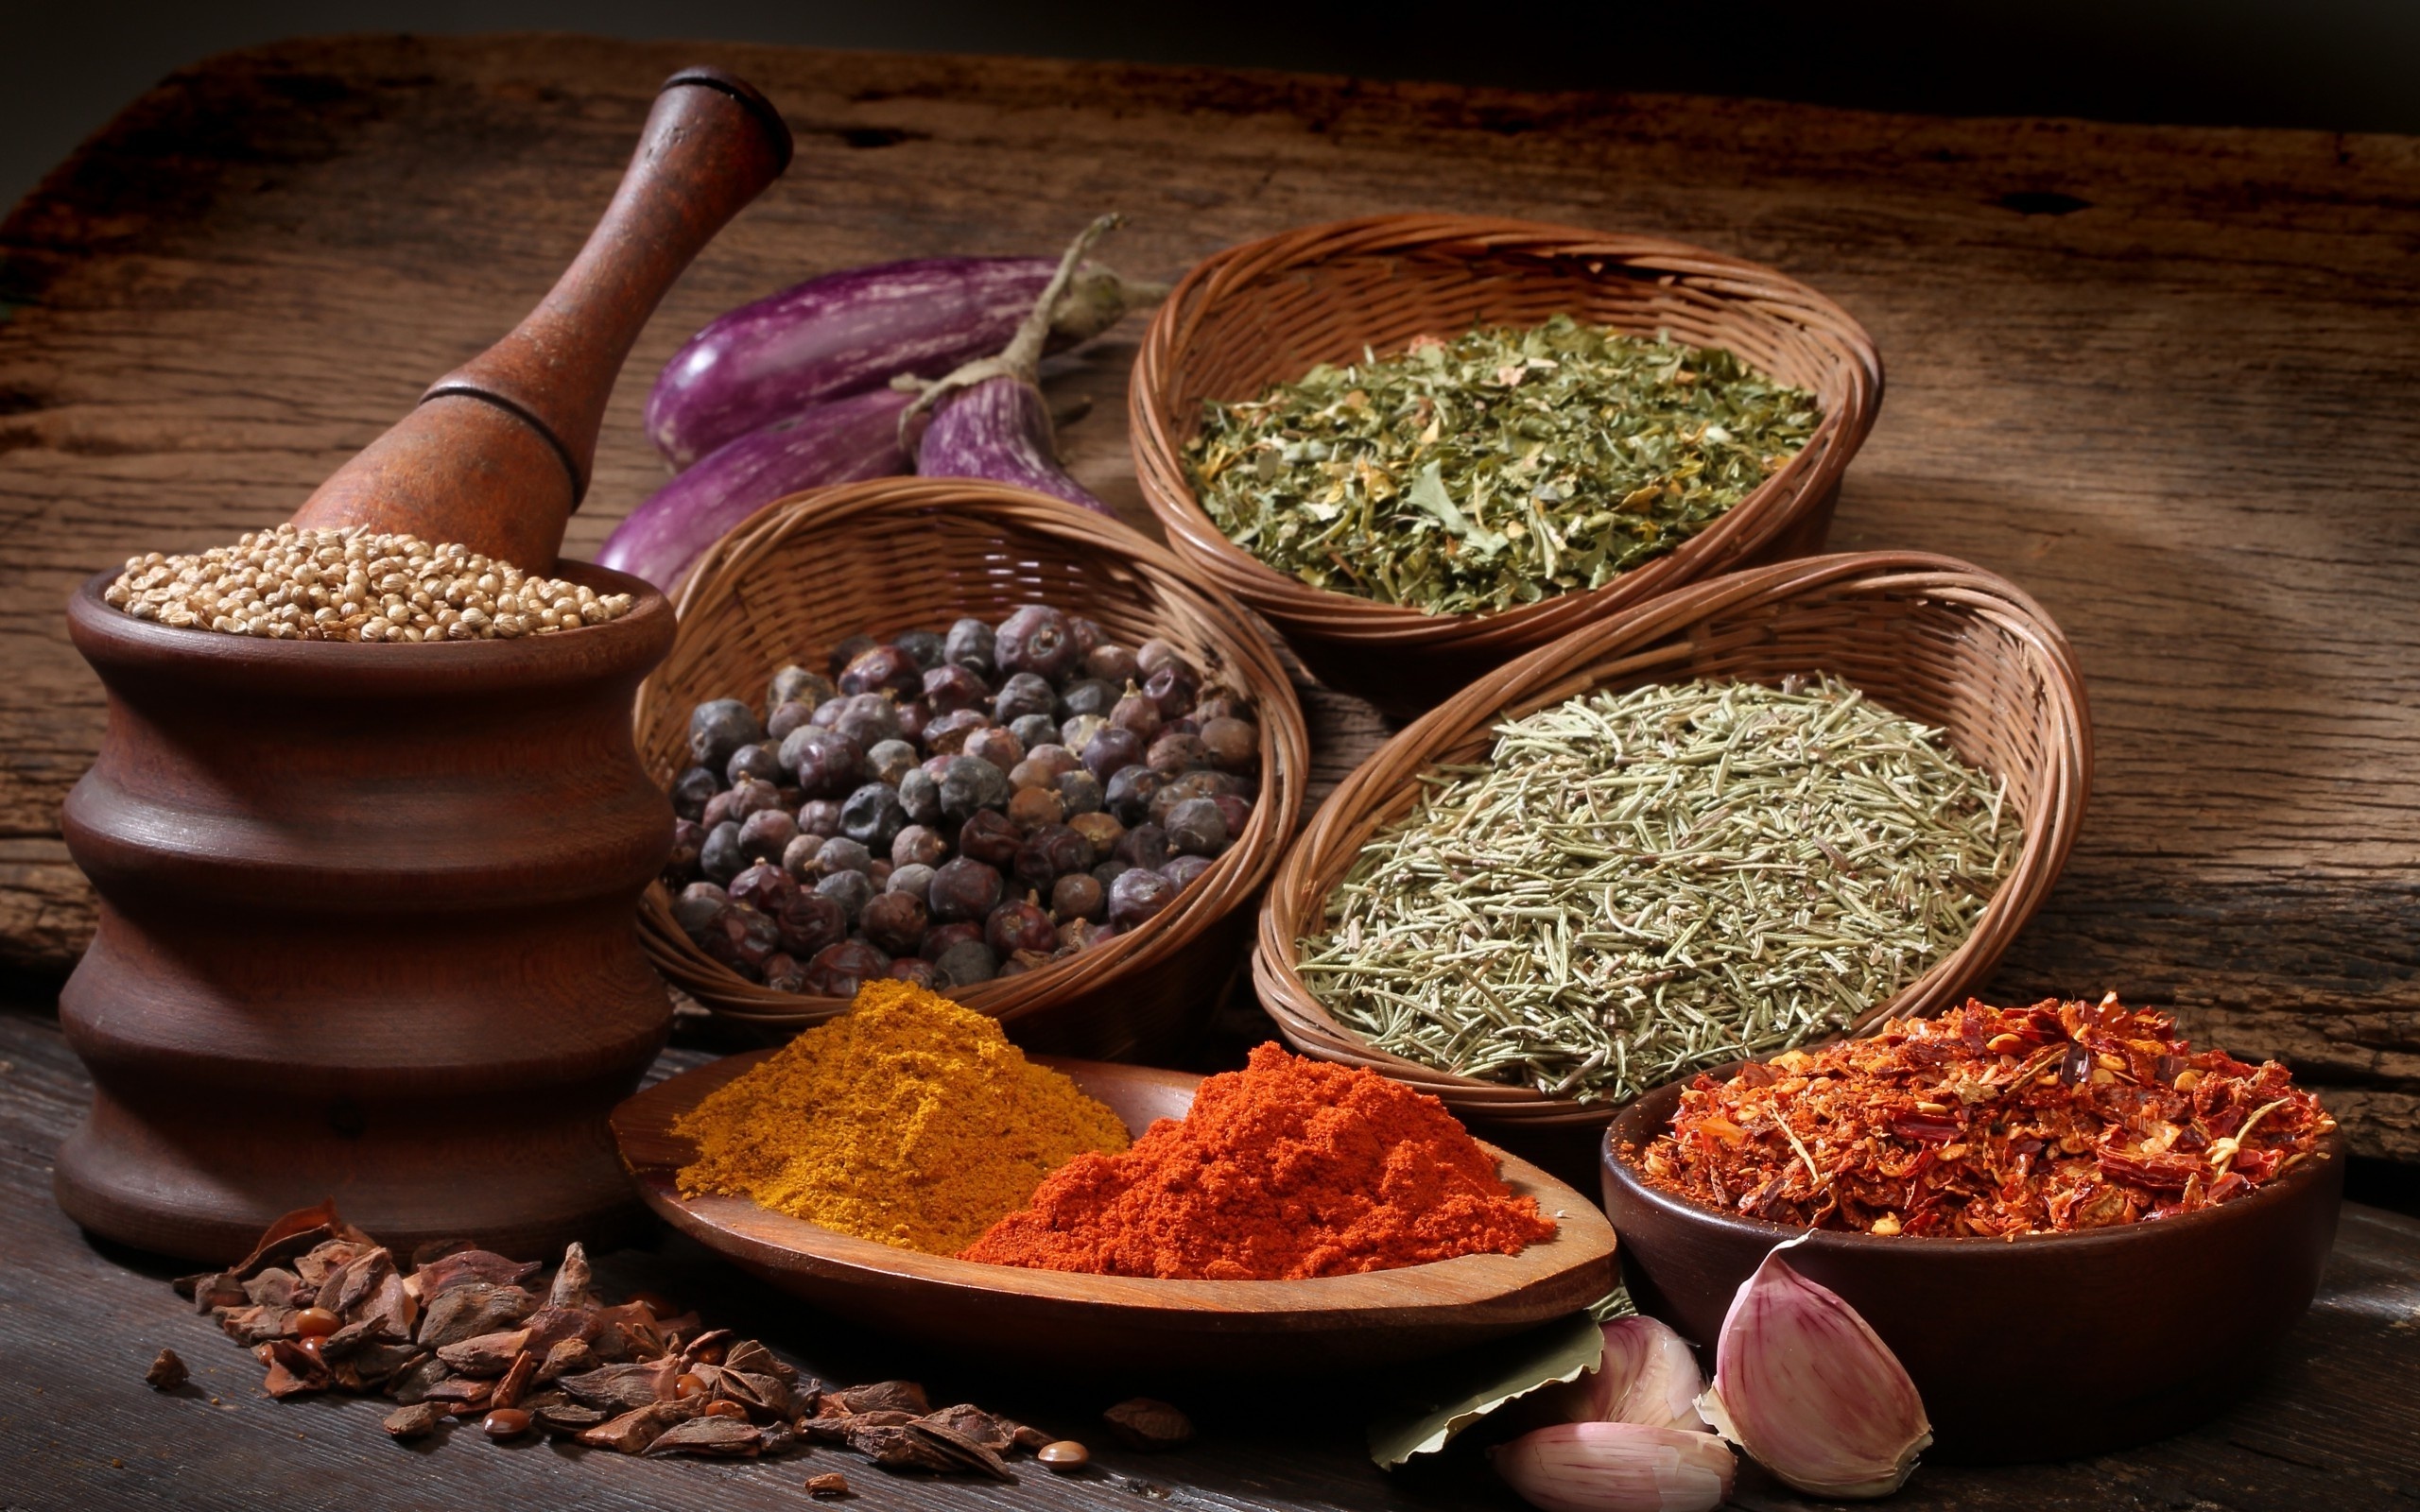 Spices: Herbs, Supplementing food to enhance a particular flavor. 2560x1600 HD Wallpaper.